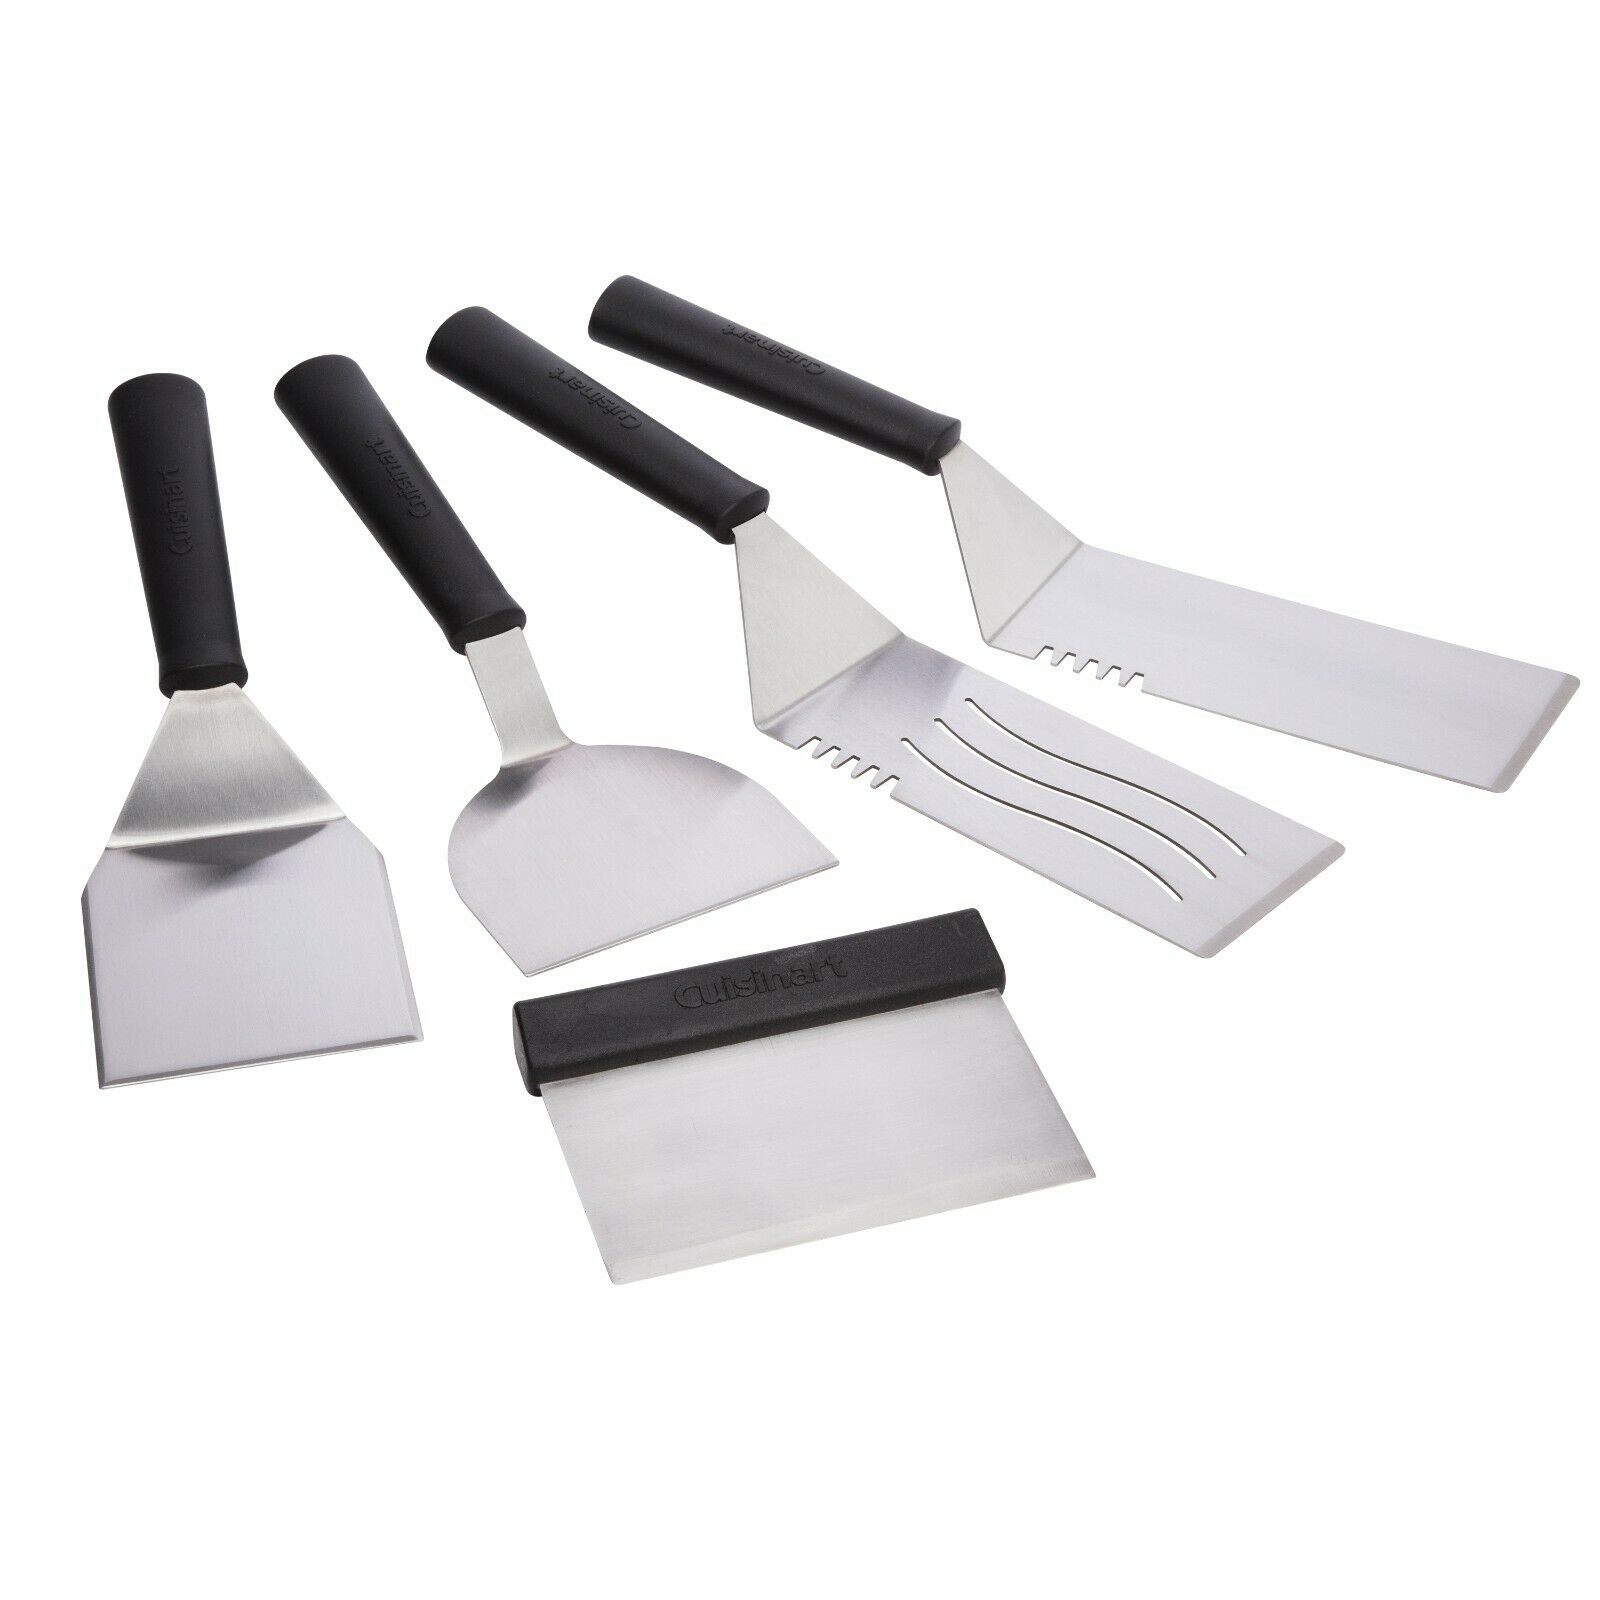 Cuisinart 5pc Stainless Steel BBQ Tool Set - image 2 of 3